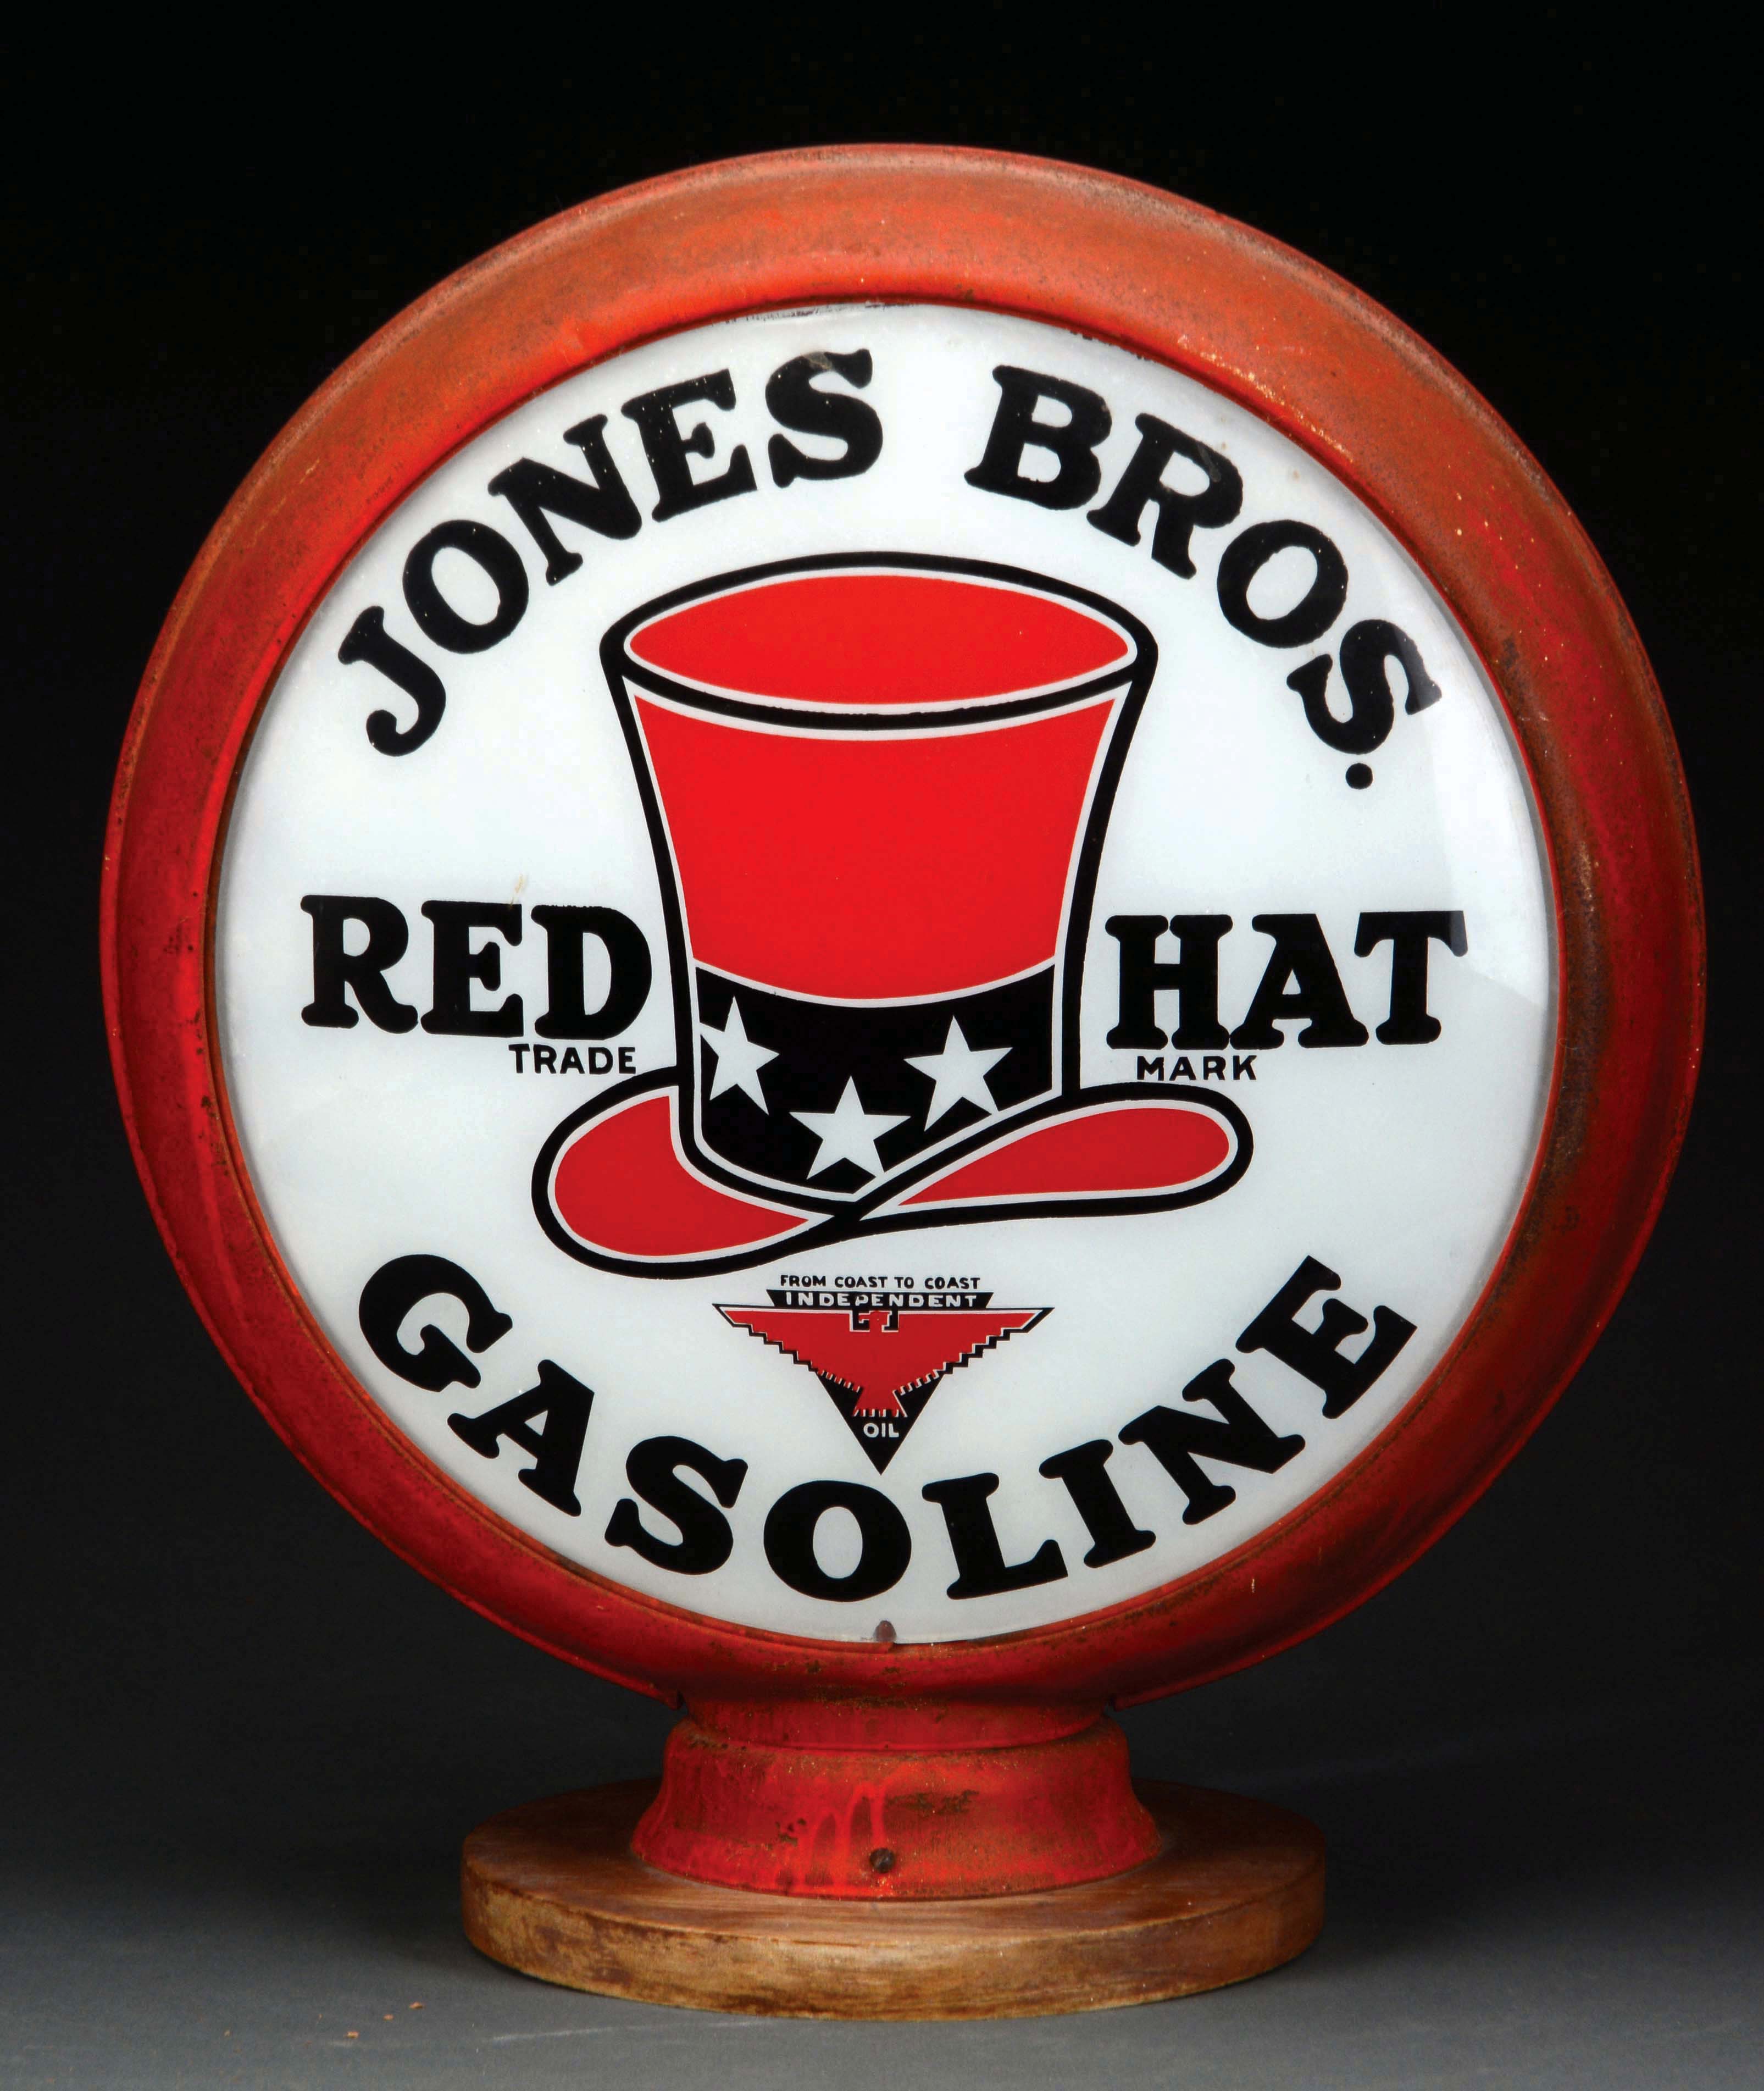 auction, 750 gas pumps and globes, vintage signs on auction docket, ClassicCars.com Journal